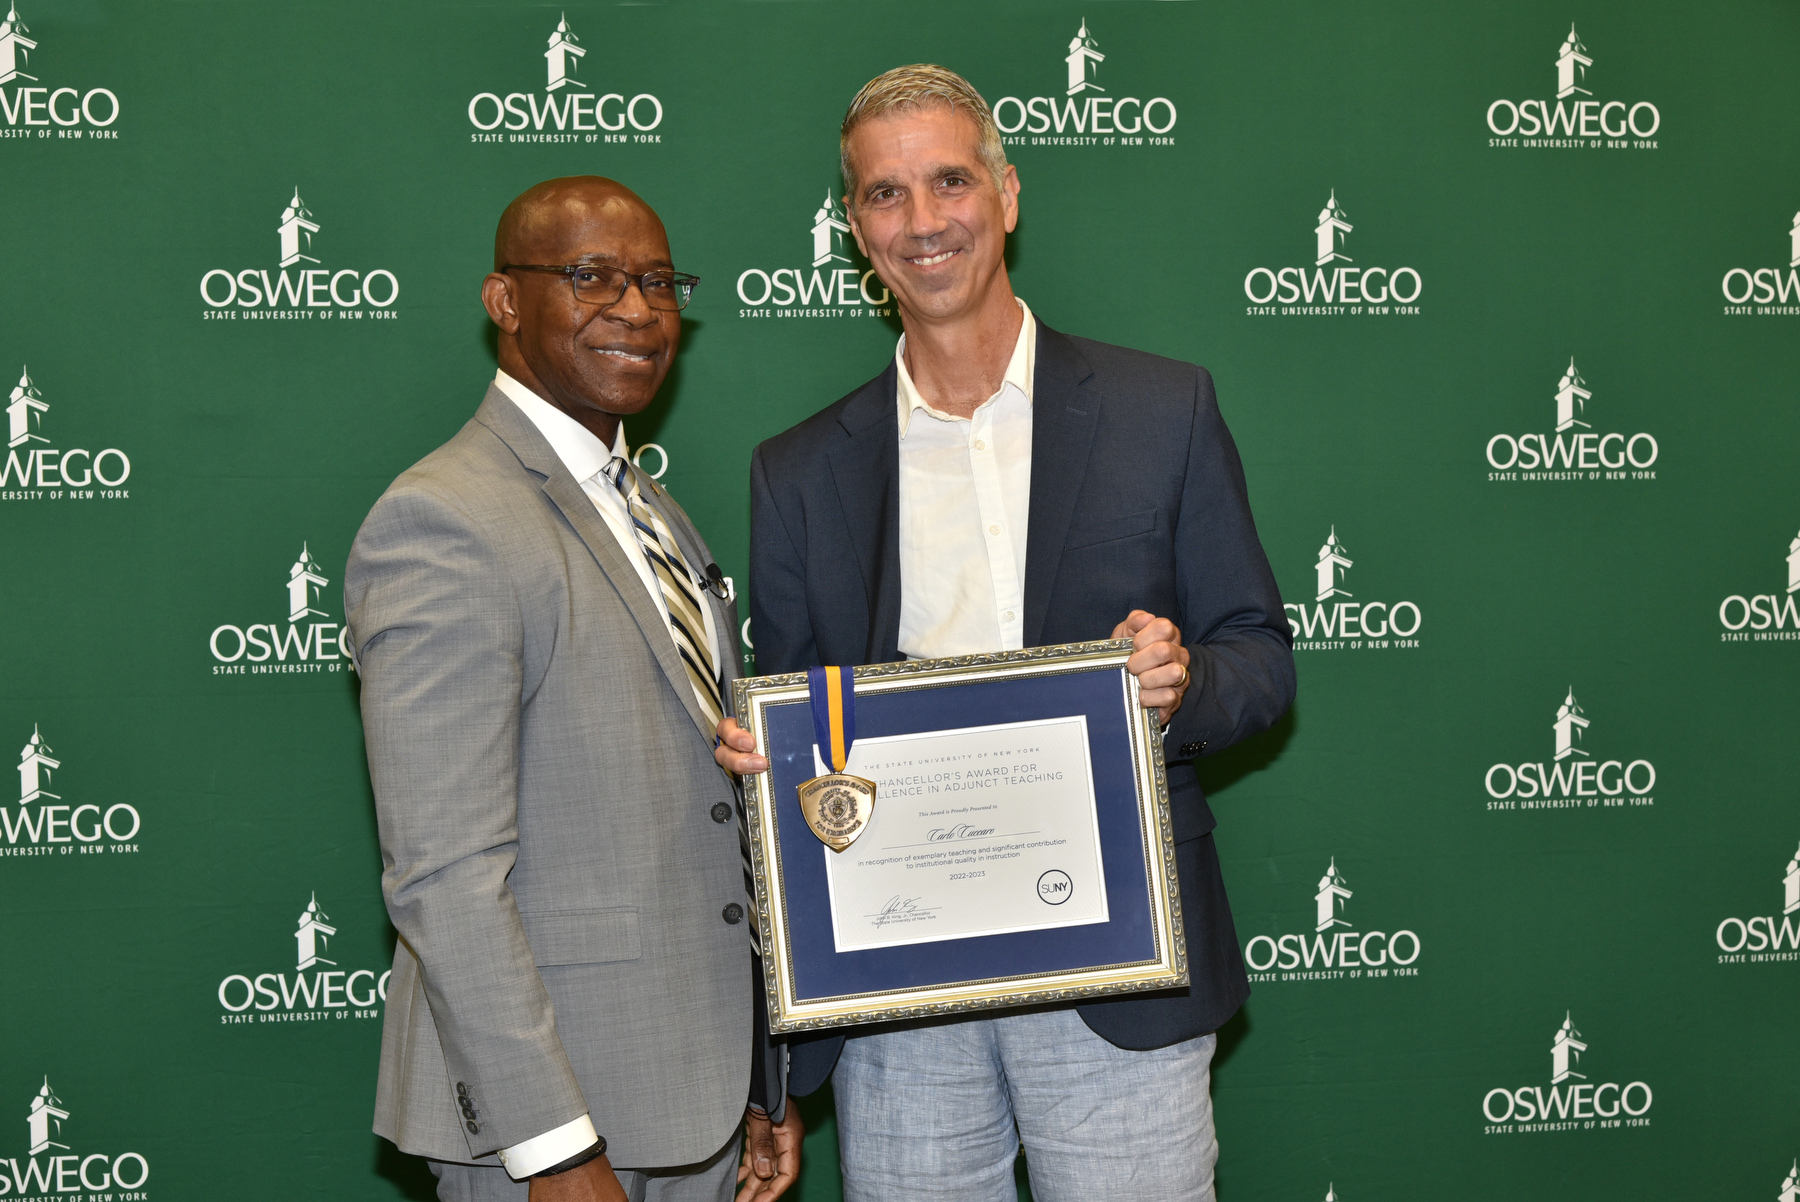 The SUNY Chancellor's Award for Excellence in Adjunct Teaching was officially presented to Carlo Cuccaro by President Peter O. Nwosu during the Opening Breakfast.